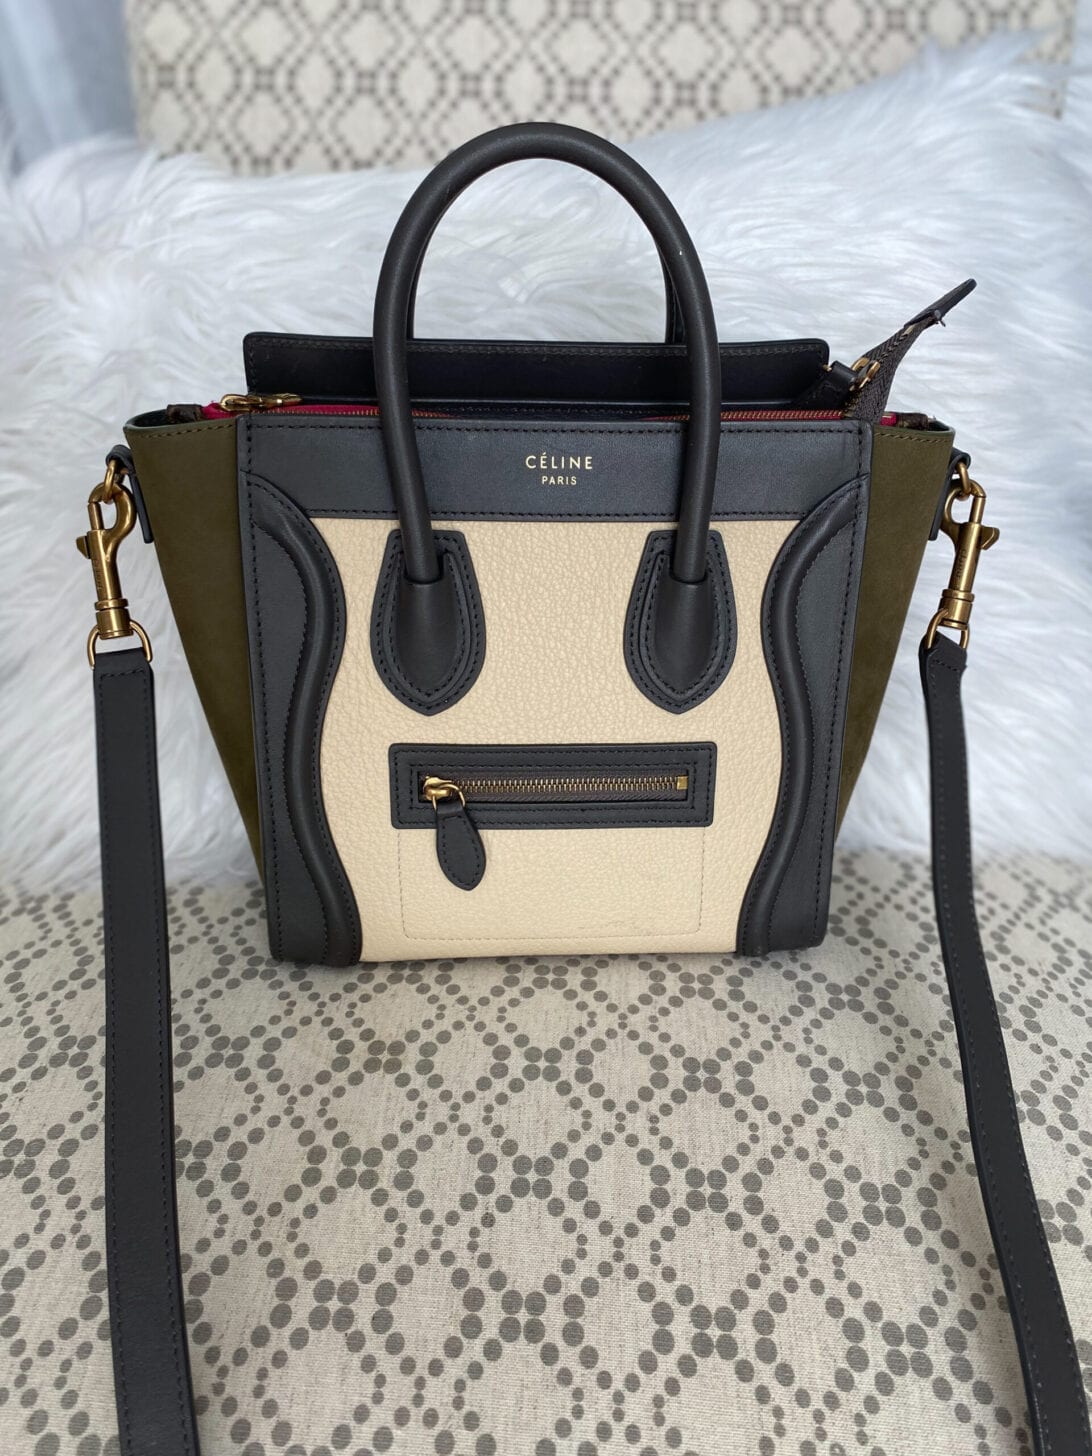 Celine Nano Bag Review + How to Clean & Care for Leather Purses - Extra  Petite